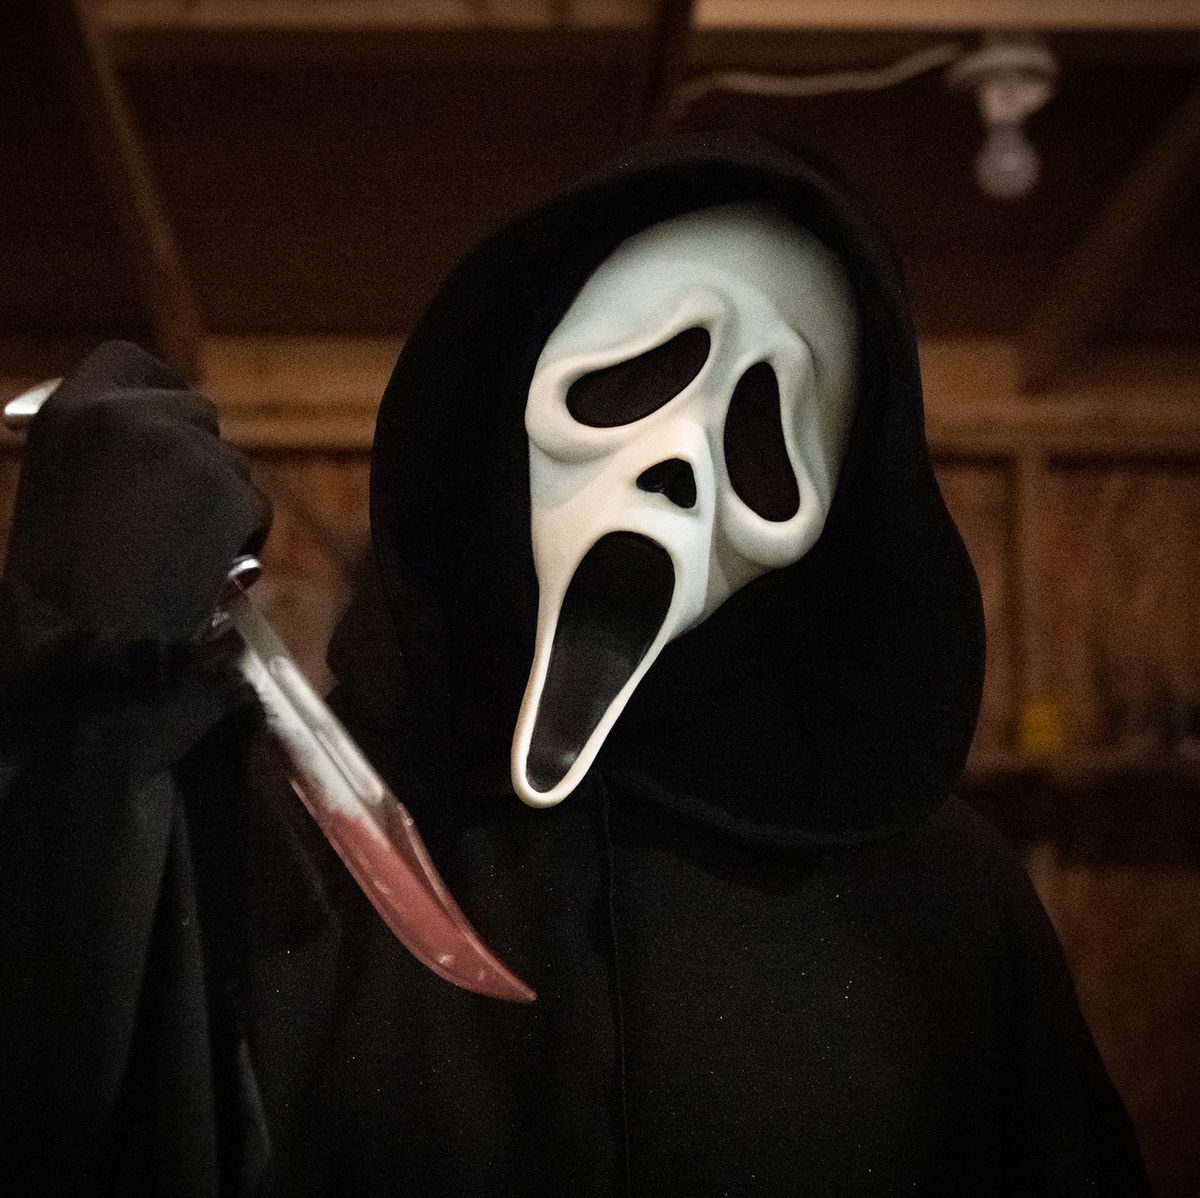 A man in a white ghostface mask is holding a knife. - Ghostface